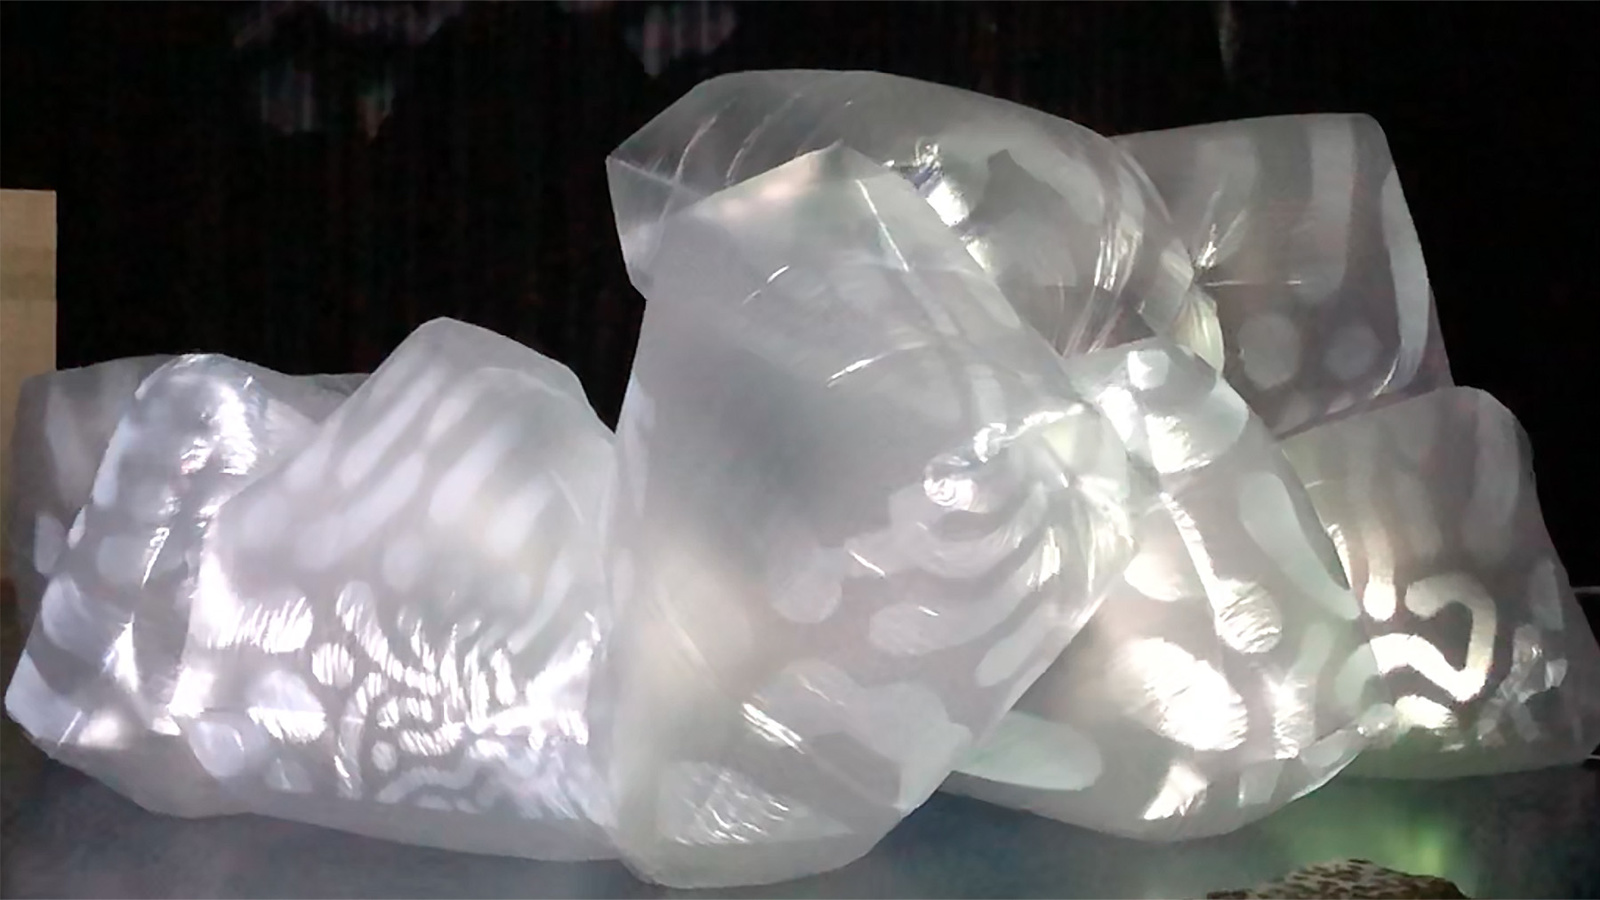 Exploration of digitally animated projection with analog moving form in an inflated spatial structure